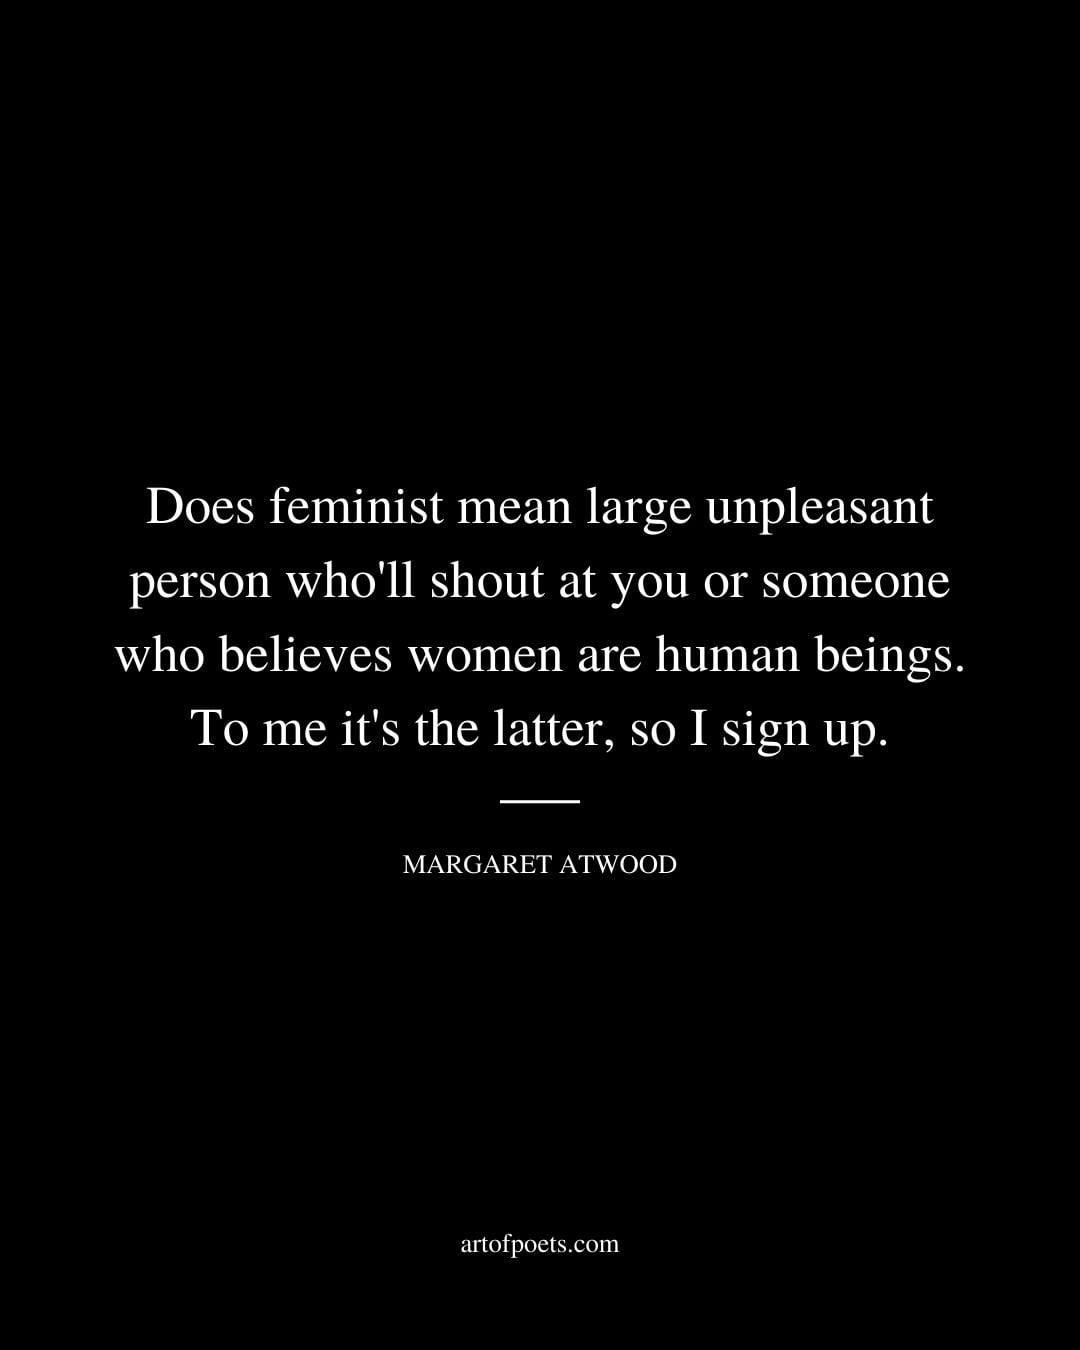 Does feminist mean large unpleasant person wholl shout at you or someone who believes women are human beings. To me its the latter so I sign up